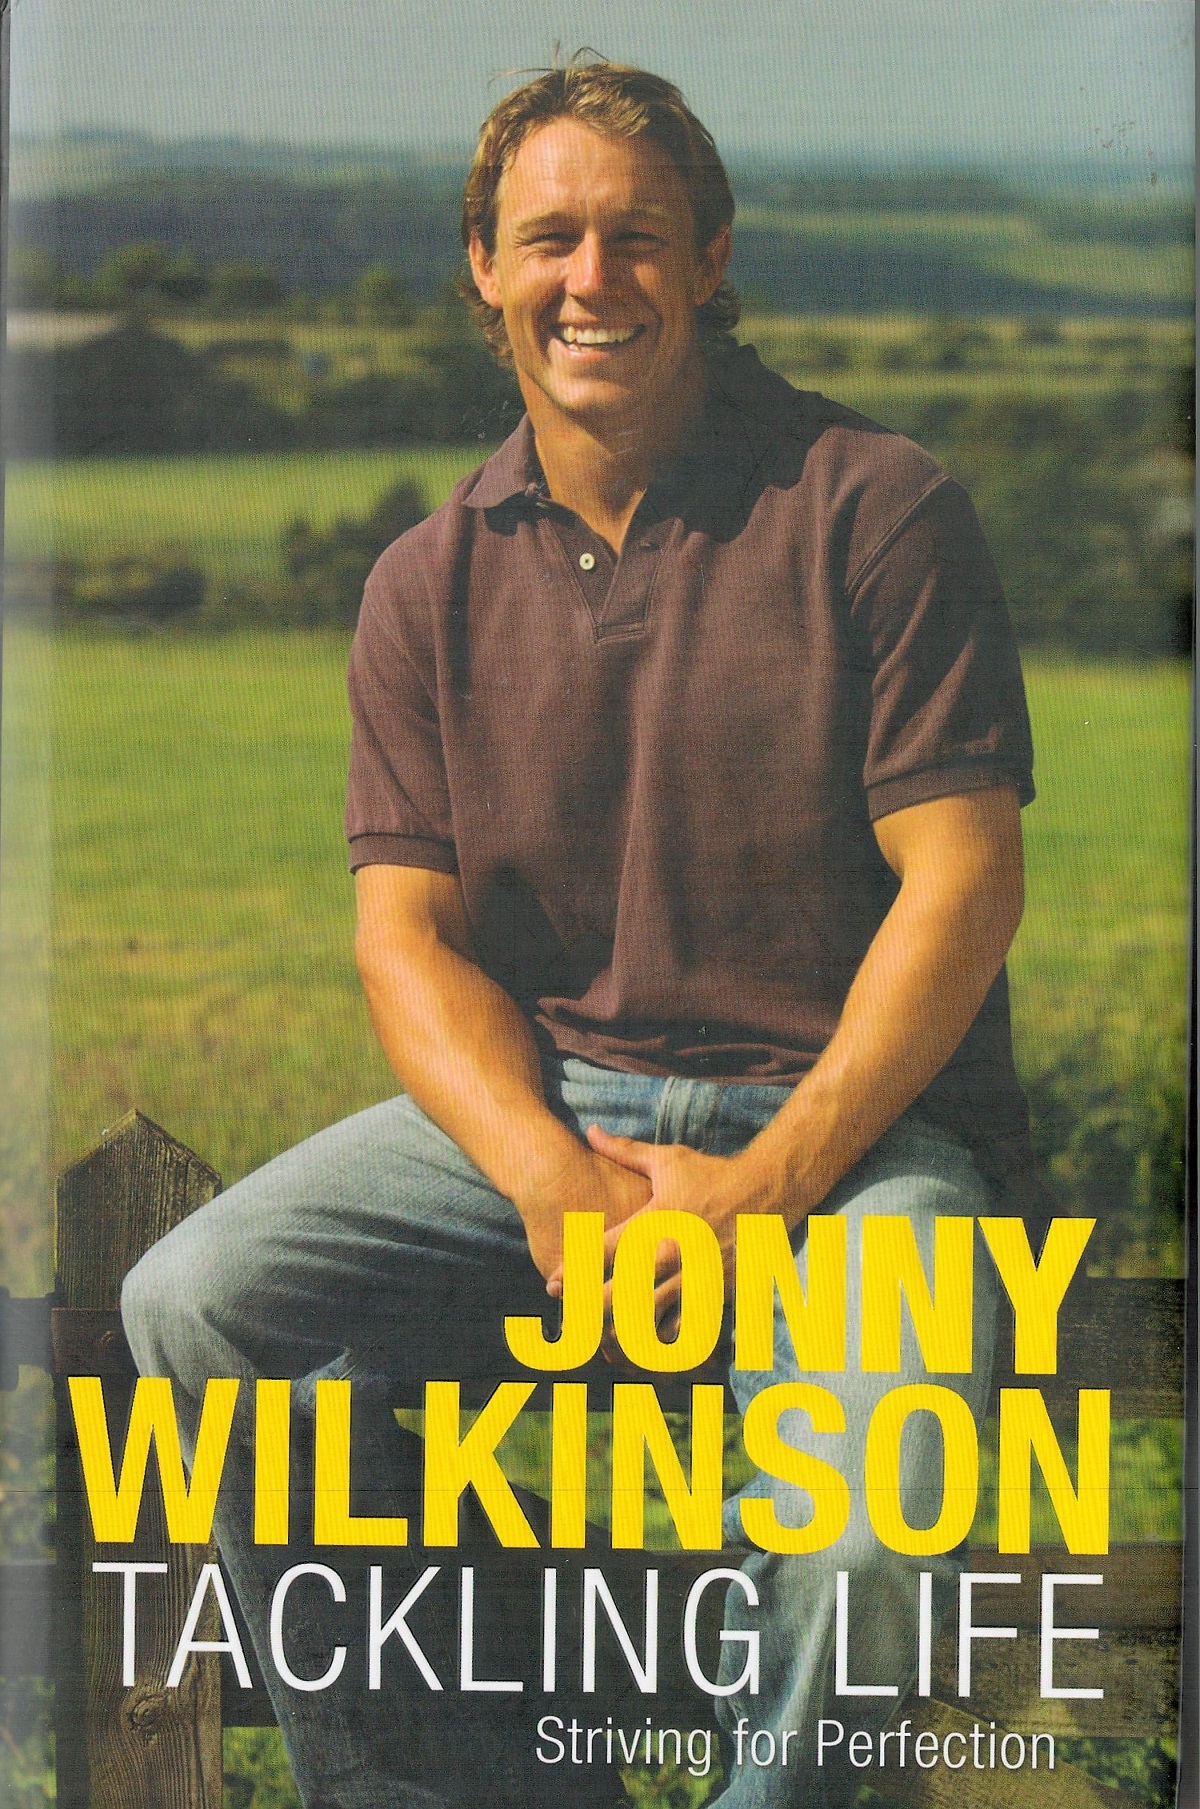 Signed Book Jonny Wilkinson Tackling Life Striving for Perfection First Edition 2008 Hardback Book